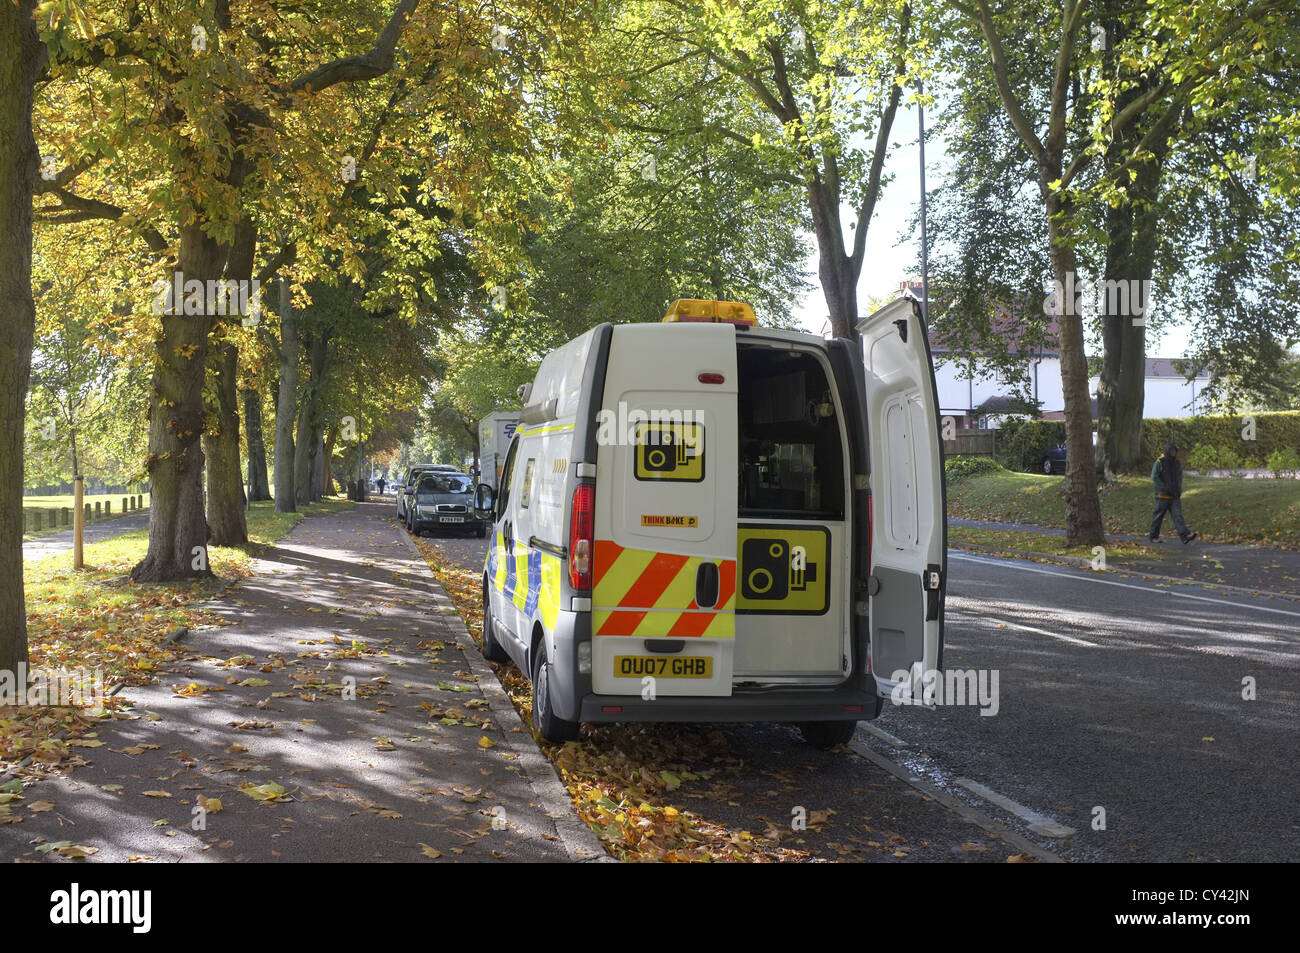 Police Van with speed checking camera Stock Photo